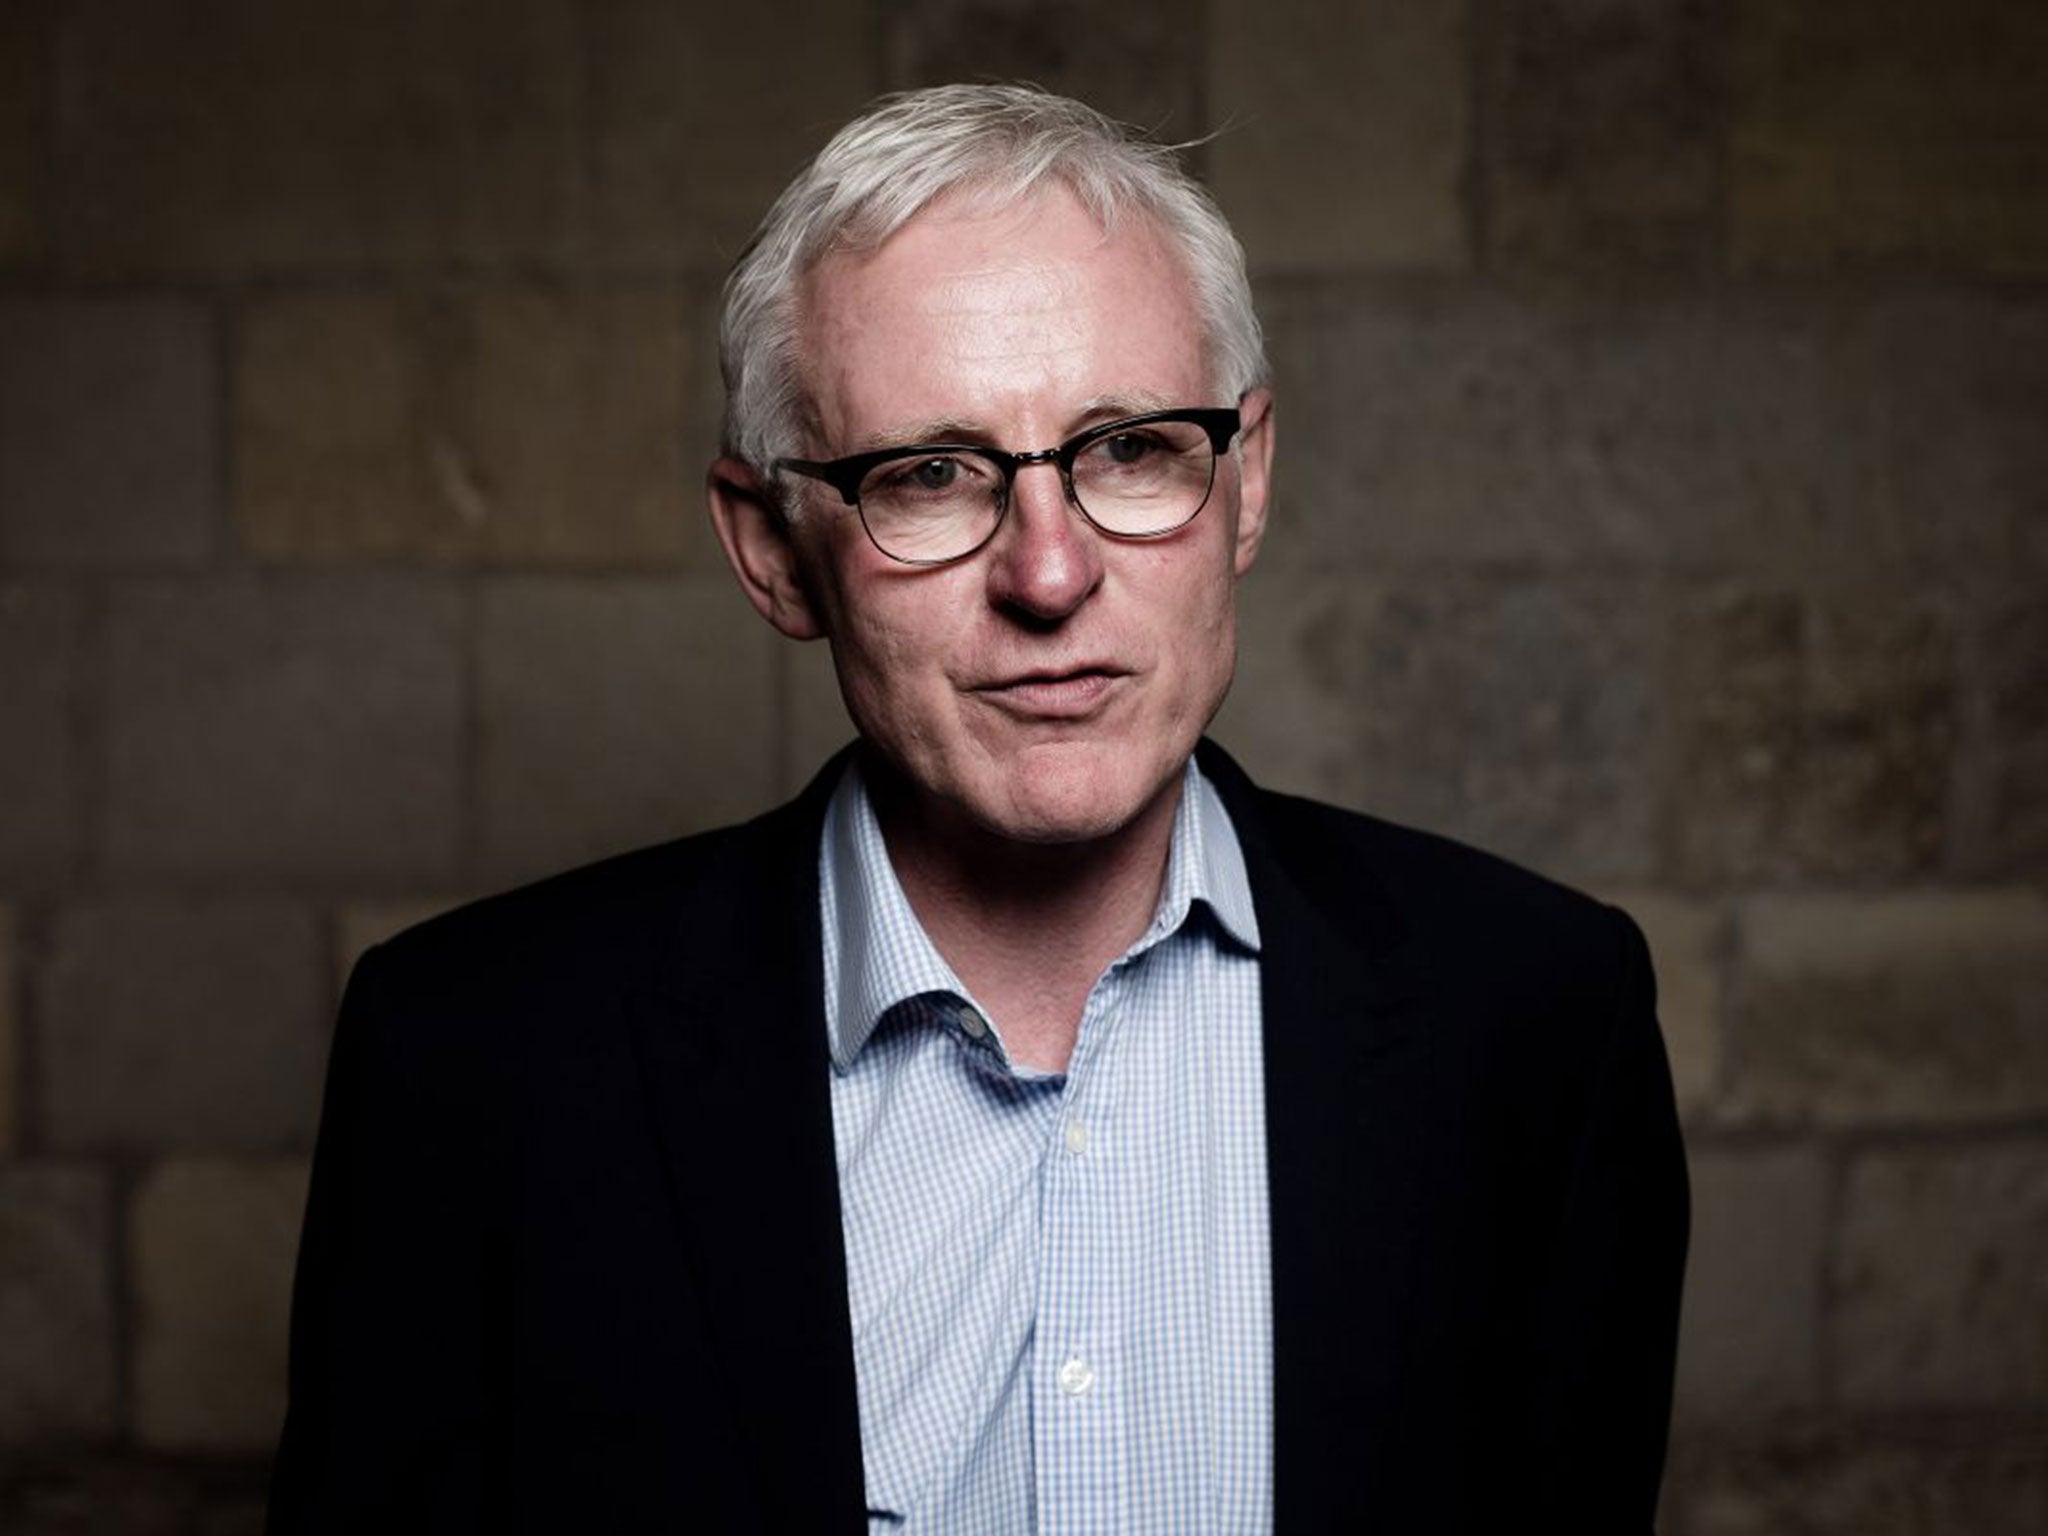 Norman Lamb served as the minister responsible for mental health in the Coalition government